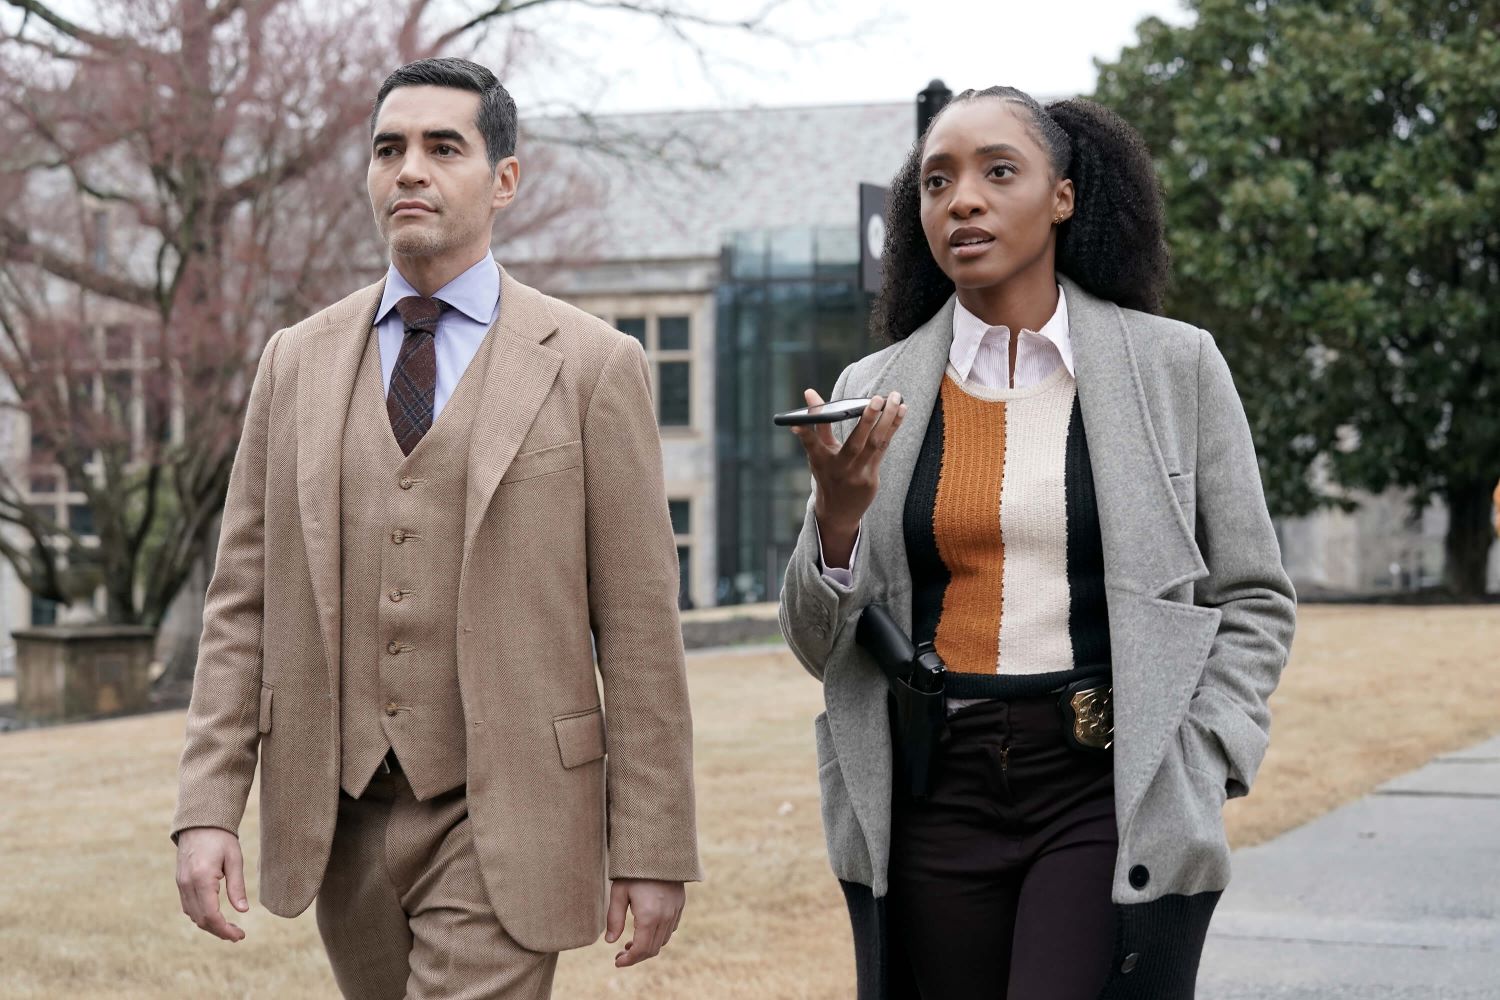 Ramón Rodríguez and Iantha Richardson star as Will Trent and Faith Mitchell in all episodes of 'Will Trent' on ABC. Will wears a tan three-piece suit over a white button-up shirt and dark brown tie. Faith wears a light gray coat over a black, brown, and white sweater and black pants.